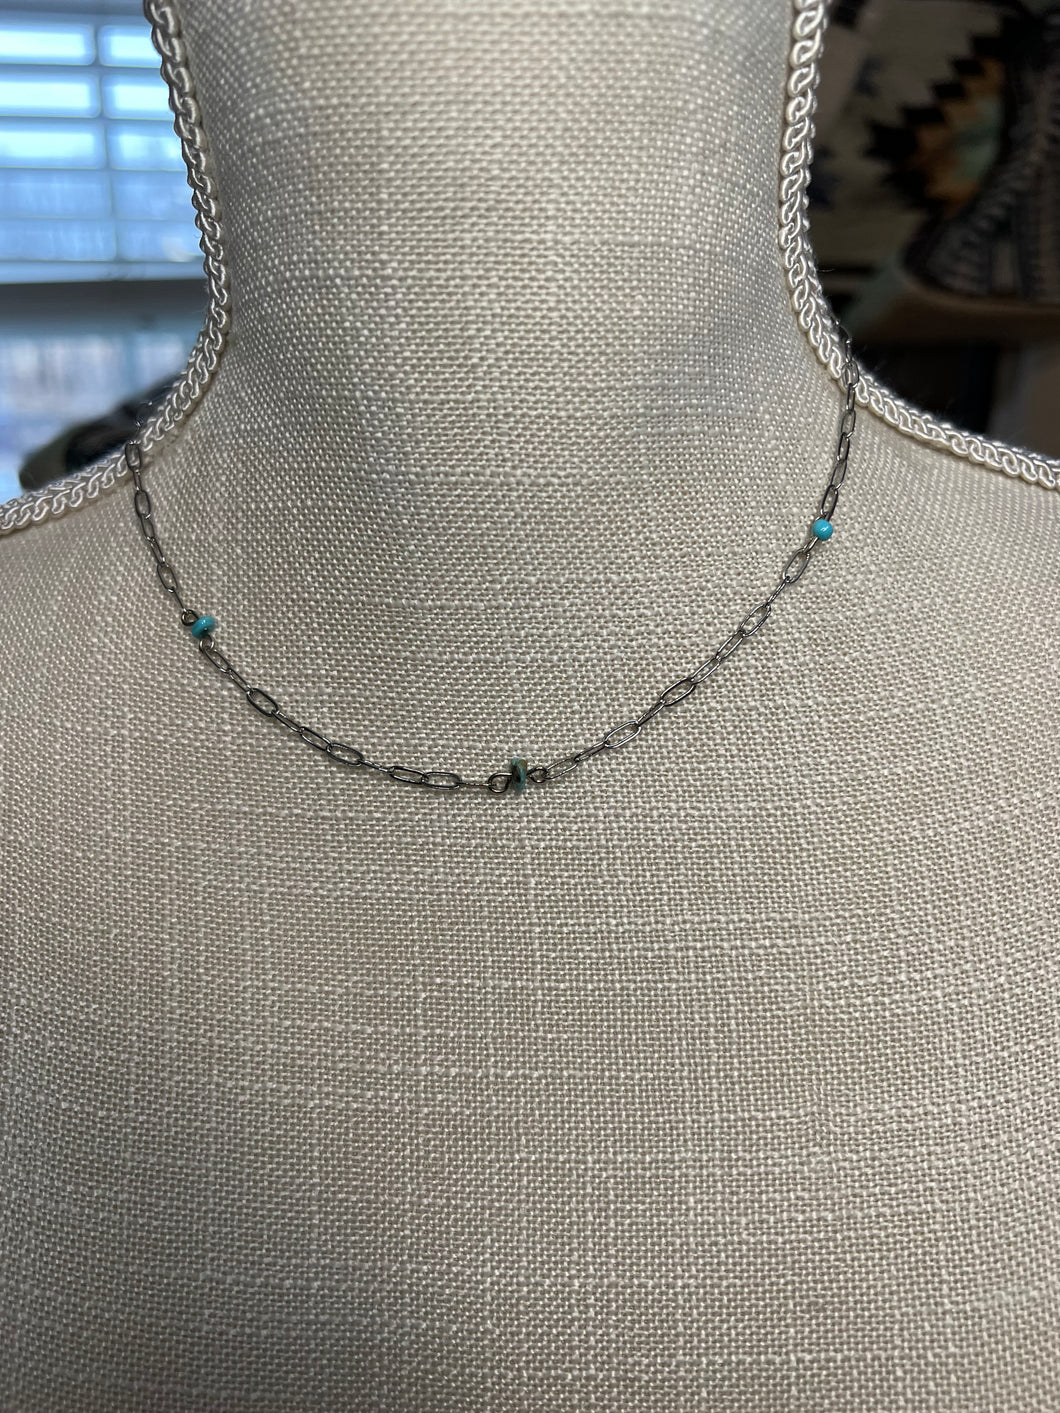 A Touch of Turquoise Choker